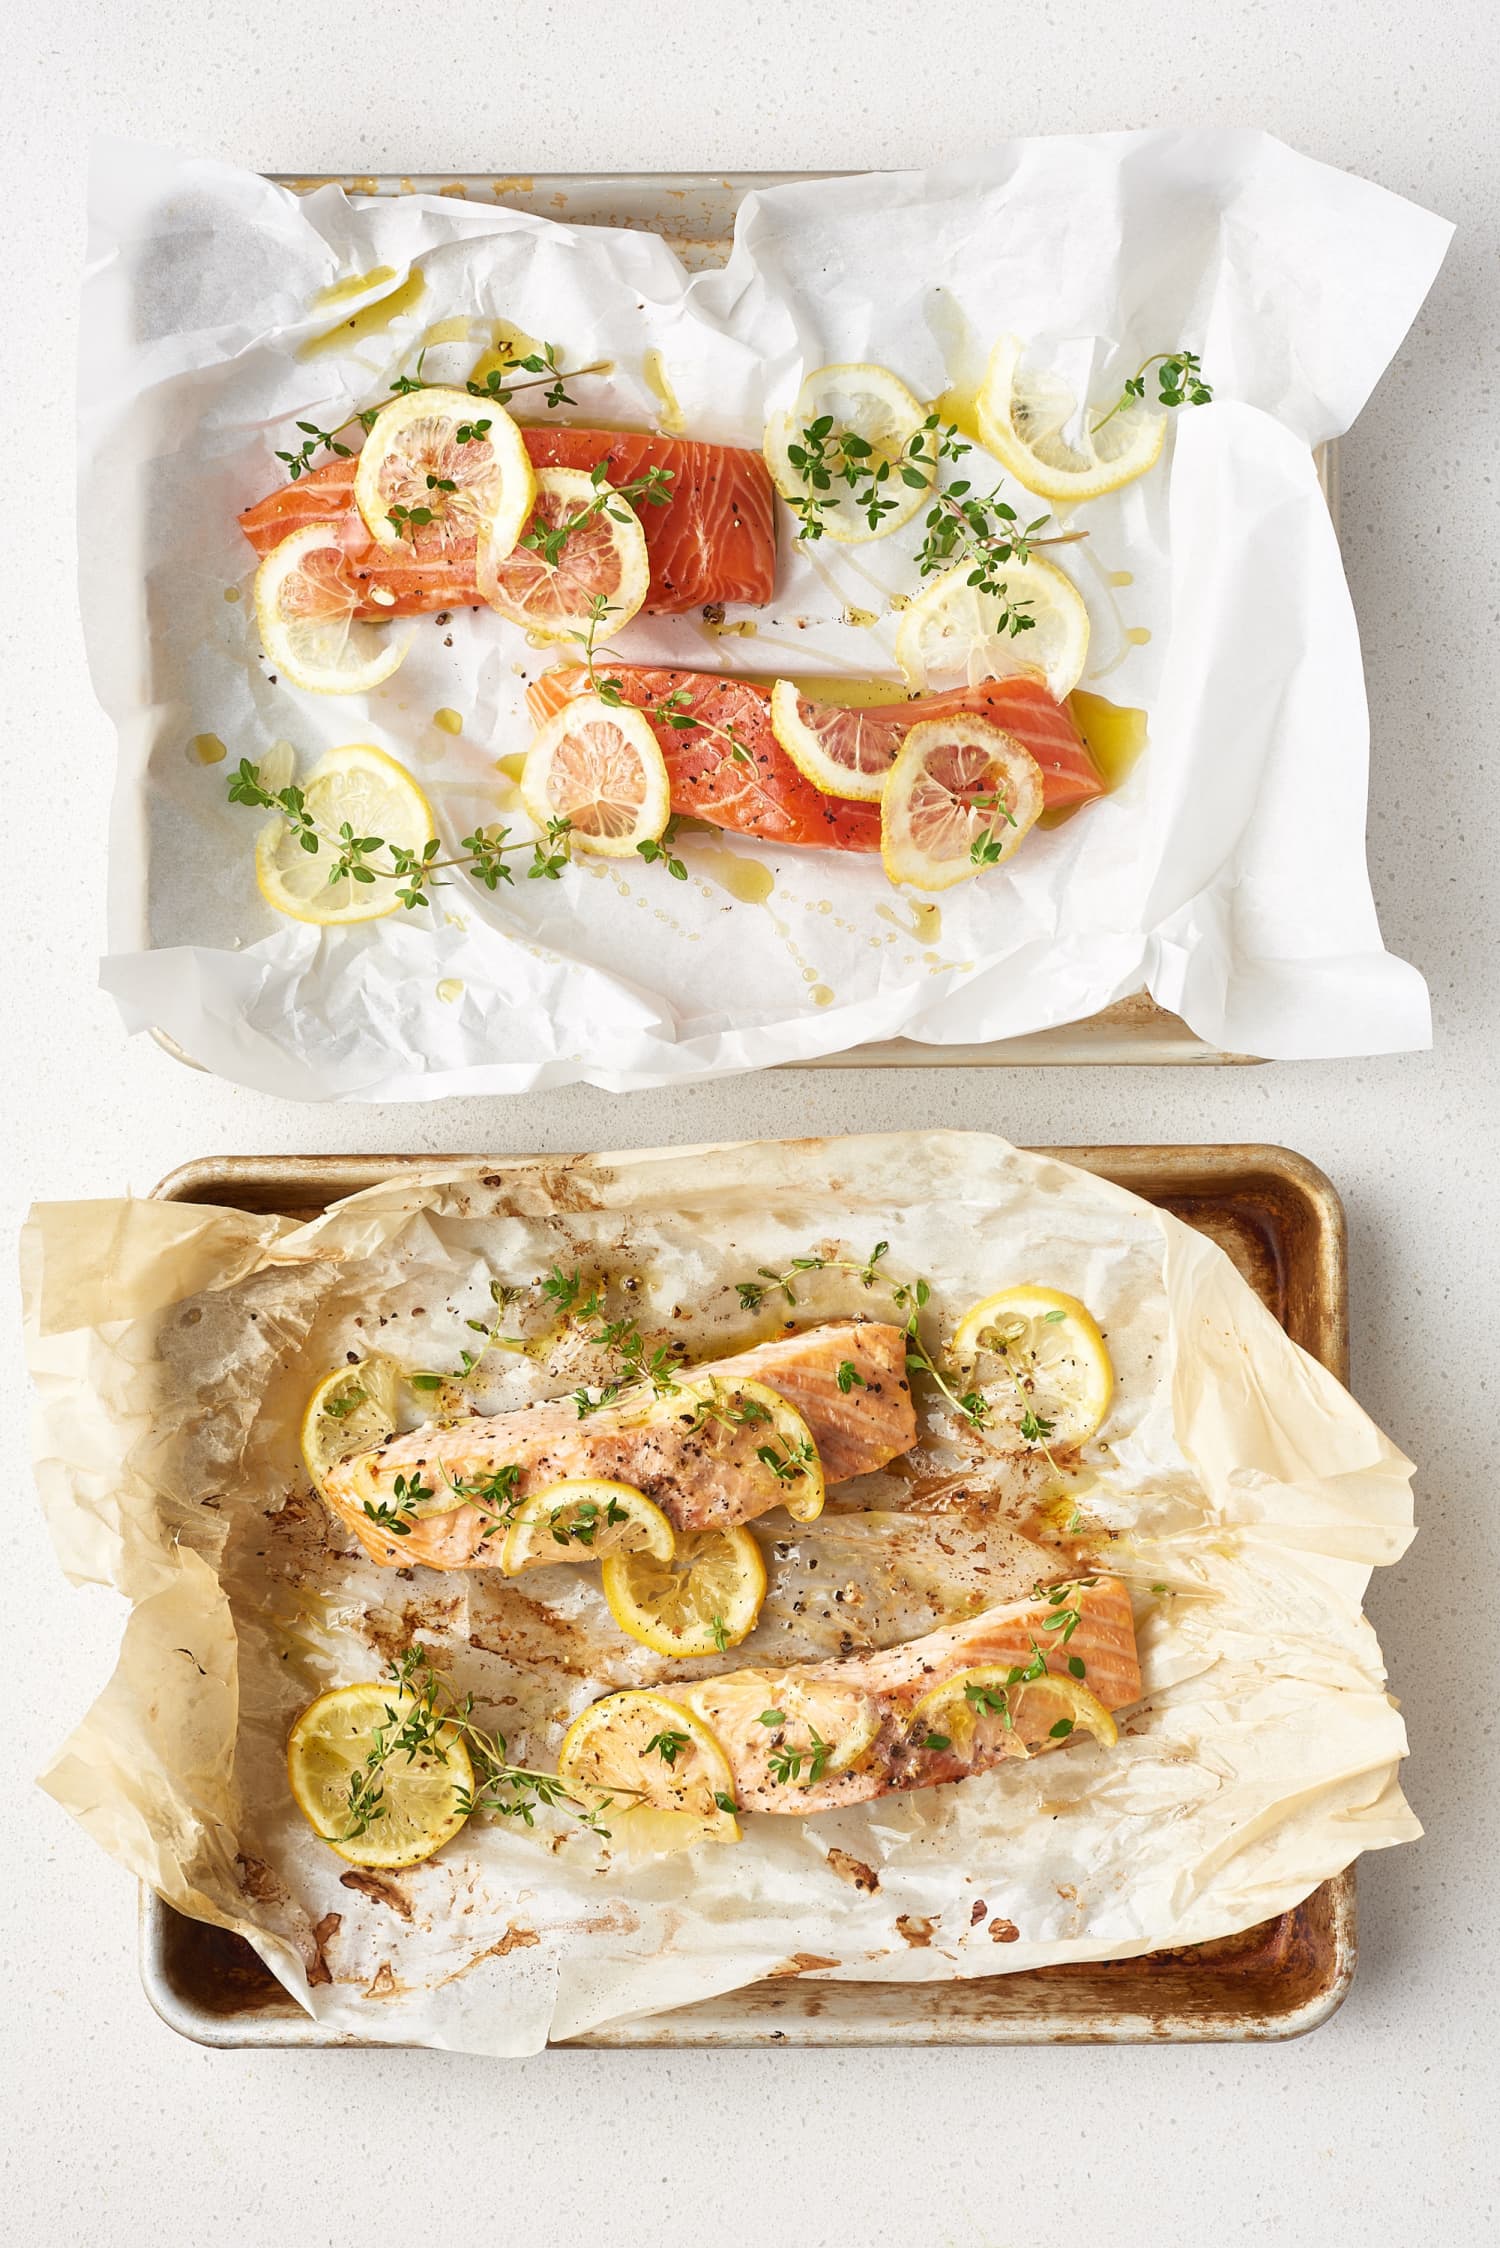 The Foolproof Way to Bake Salmon